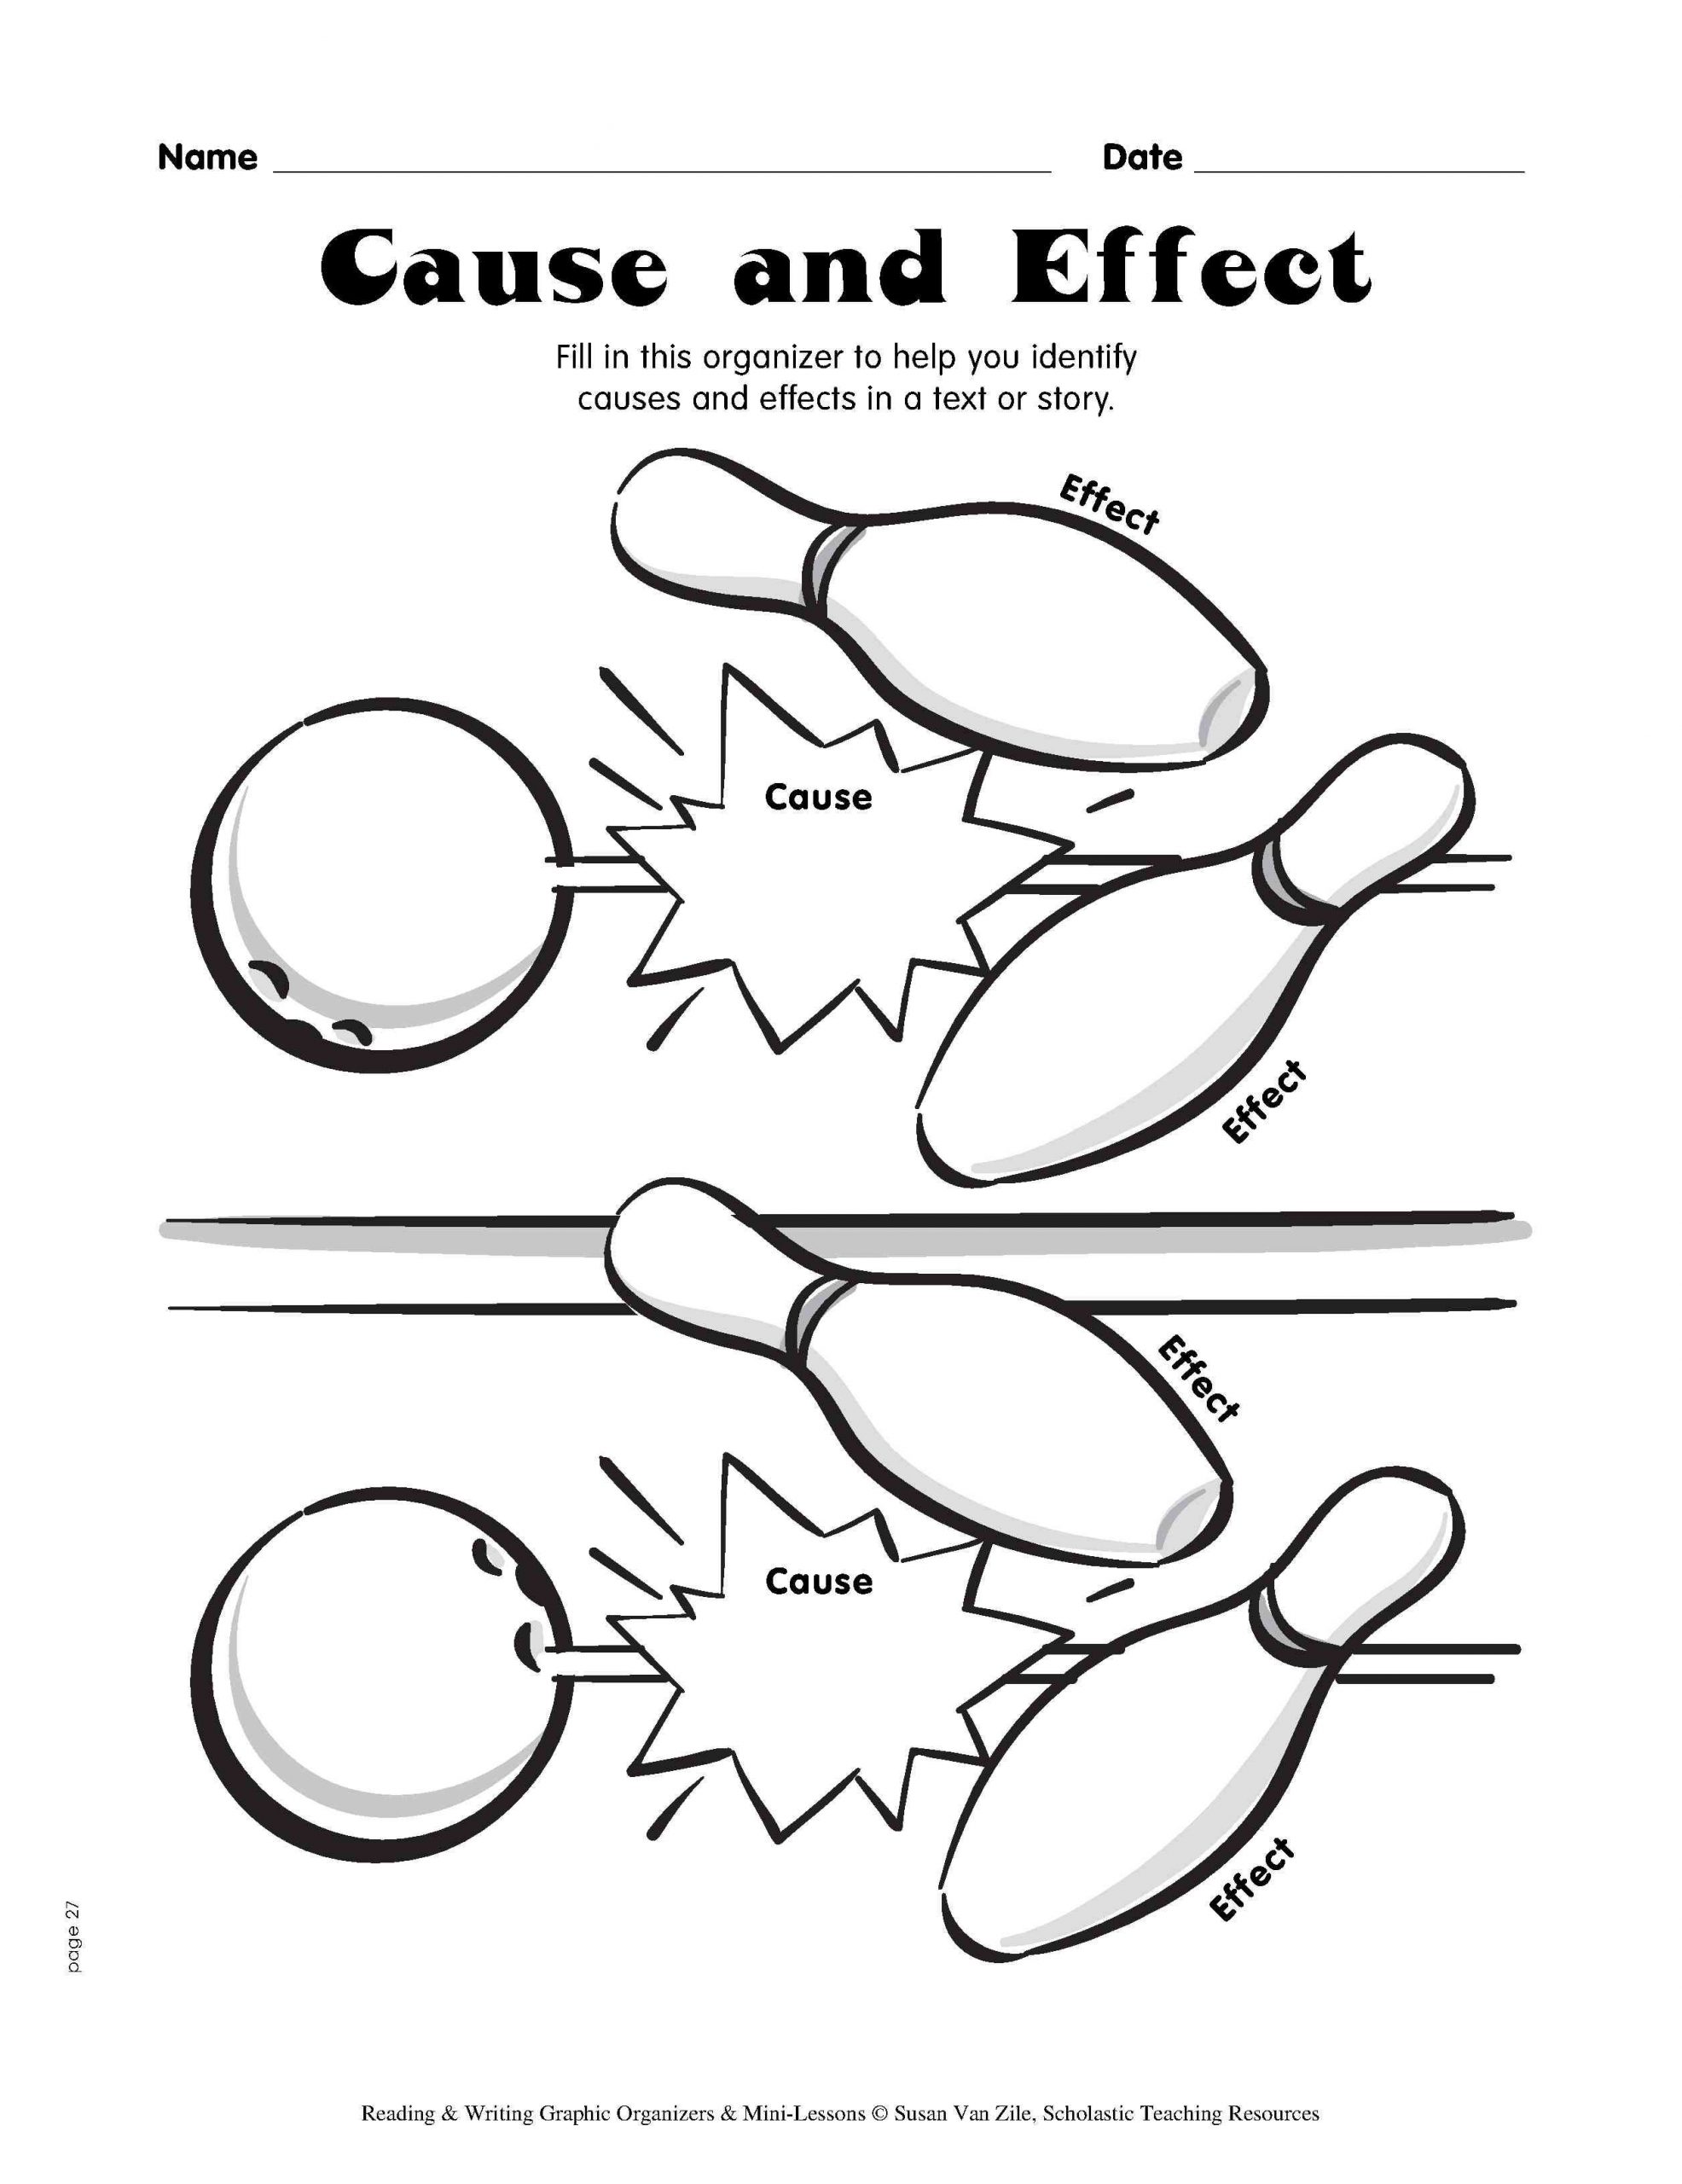 Cause And Effect Bowling | Reading Graphic Organizers